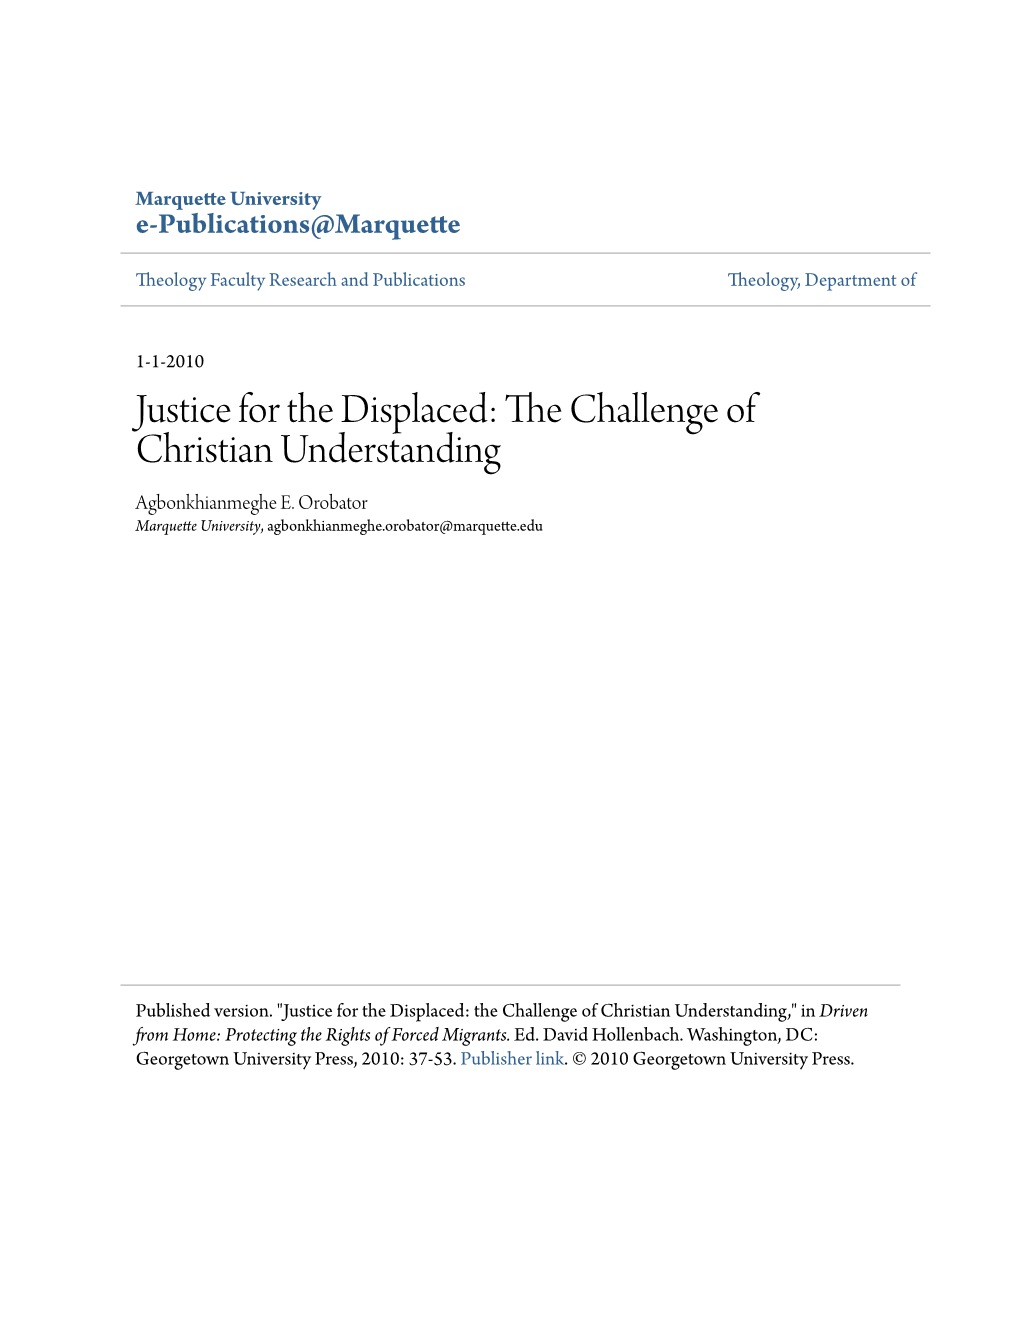 Justice for the Displaced: the Challenge of Christian Understanding," in Driven from Home: Protecting the Rights of Forced Migrants